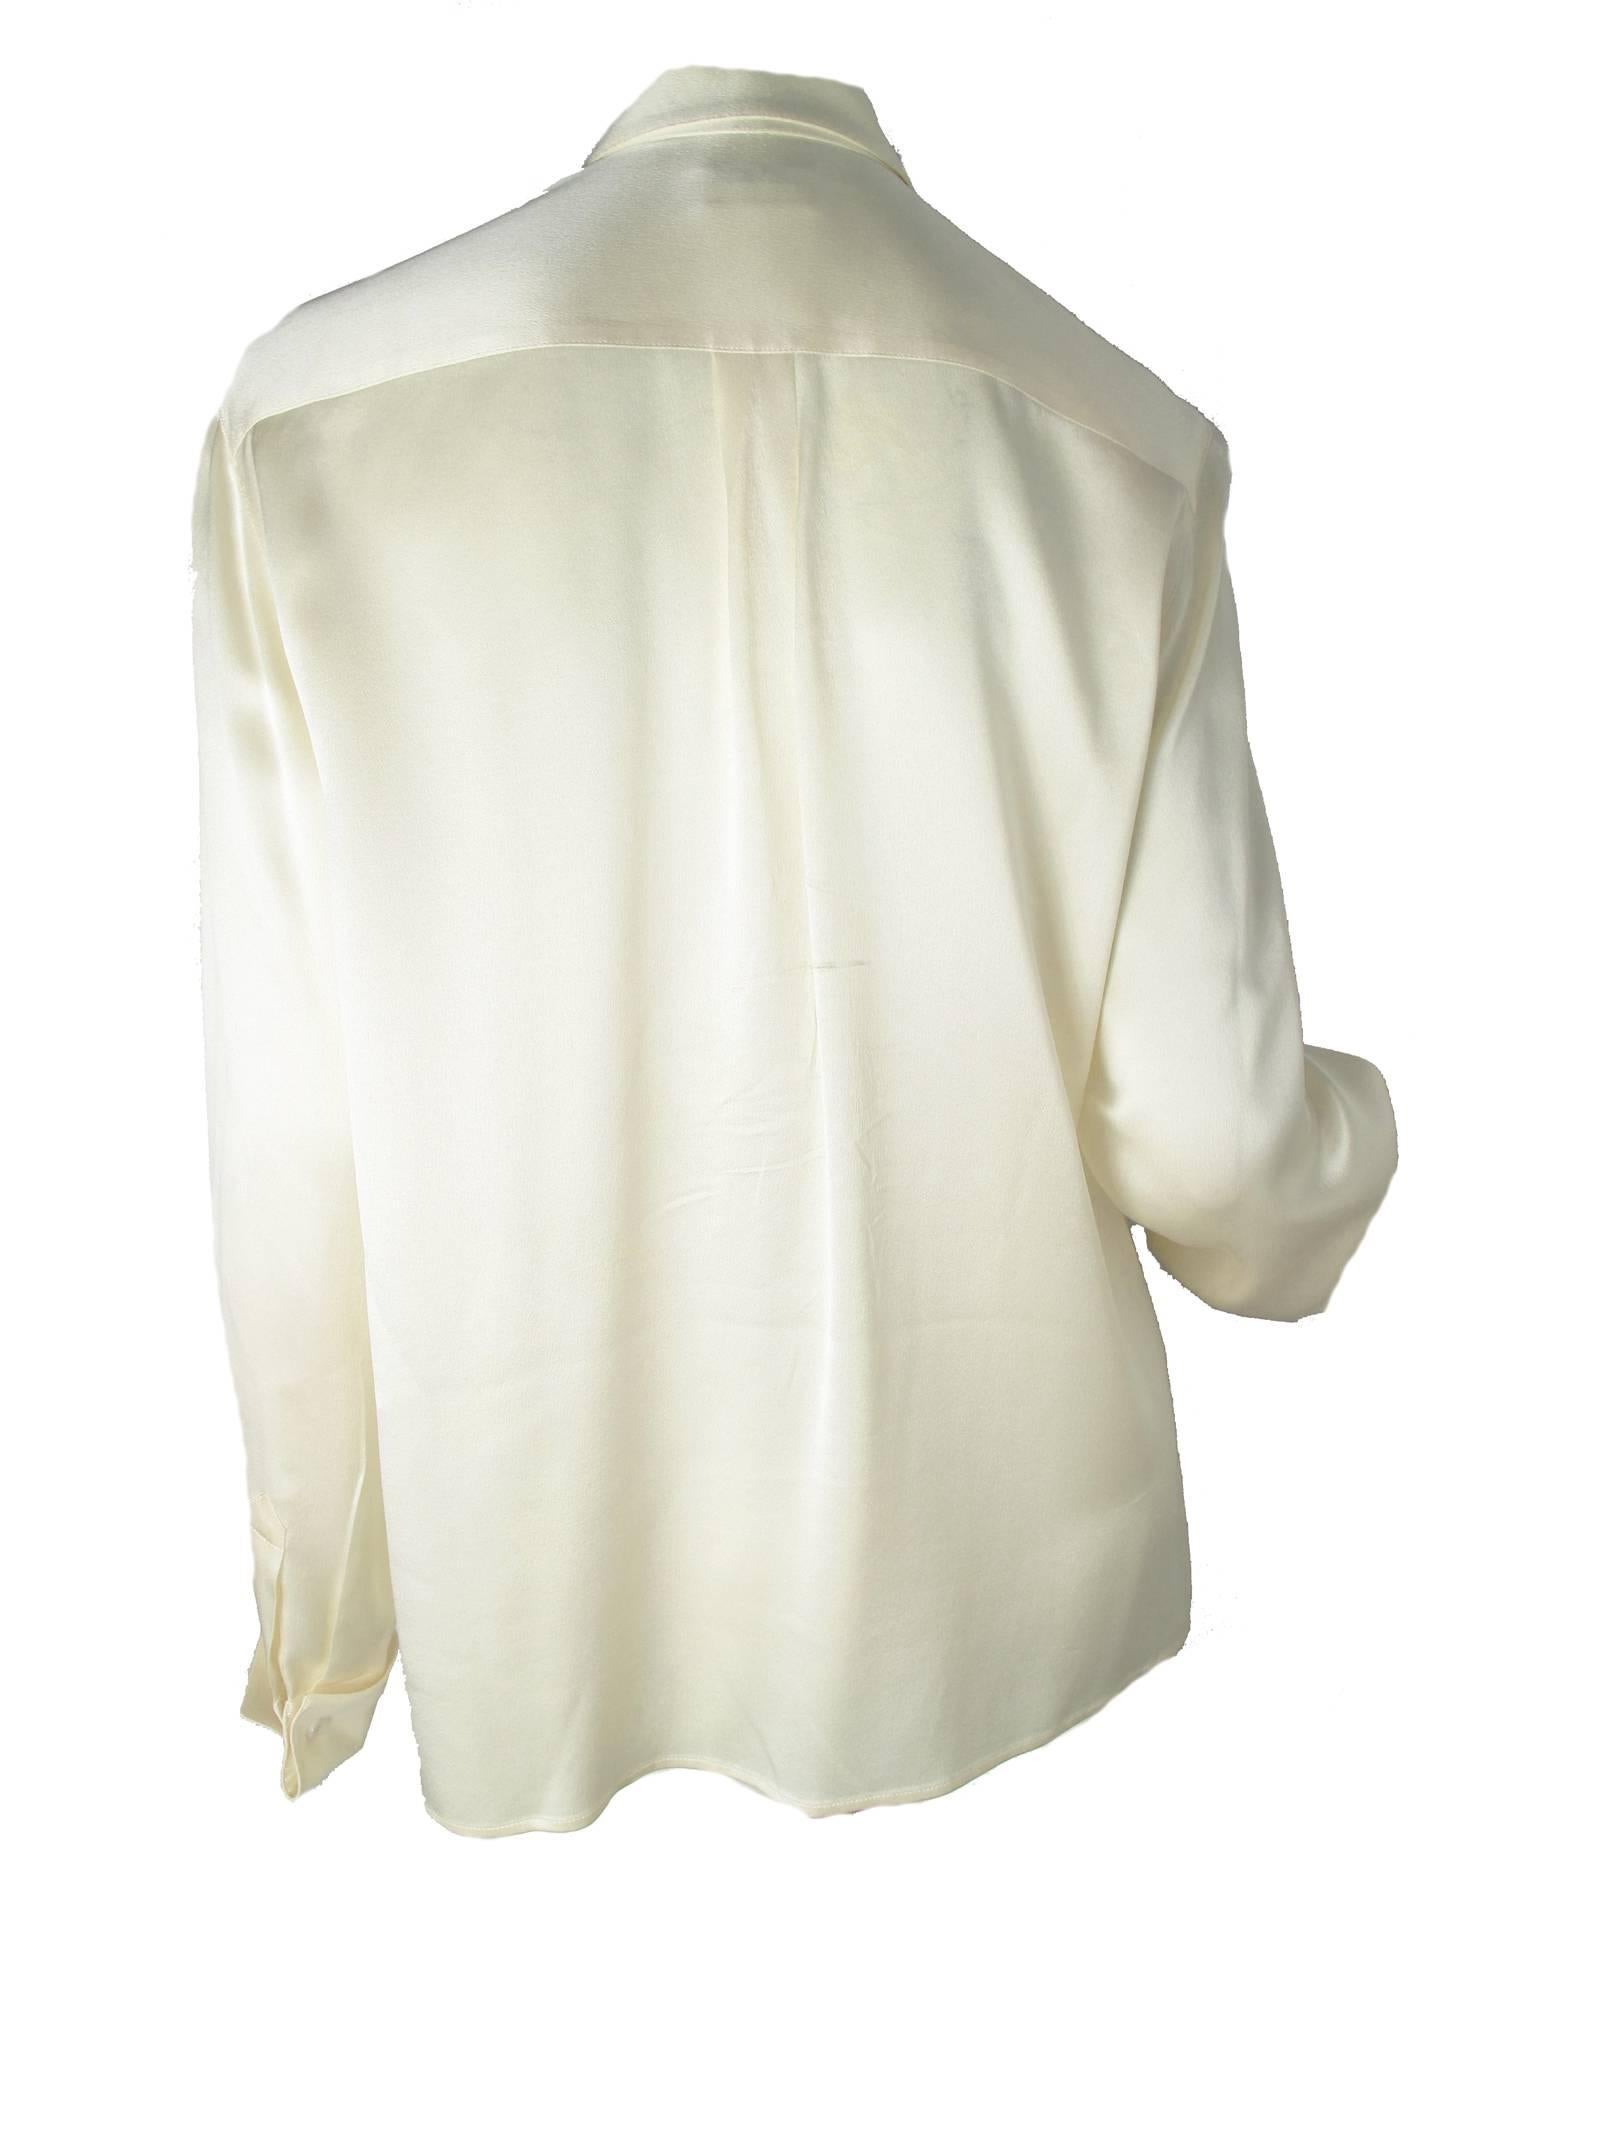 Chanel cream silk long sleeve double front button, french cuffs.  Condition: Very good. Size 40 / US 6 - 8 

We accept returns for refund, please see our terms.  We offer free ground shipping within the US.  Let us know if you have any questions.